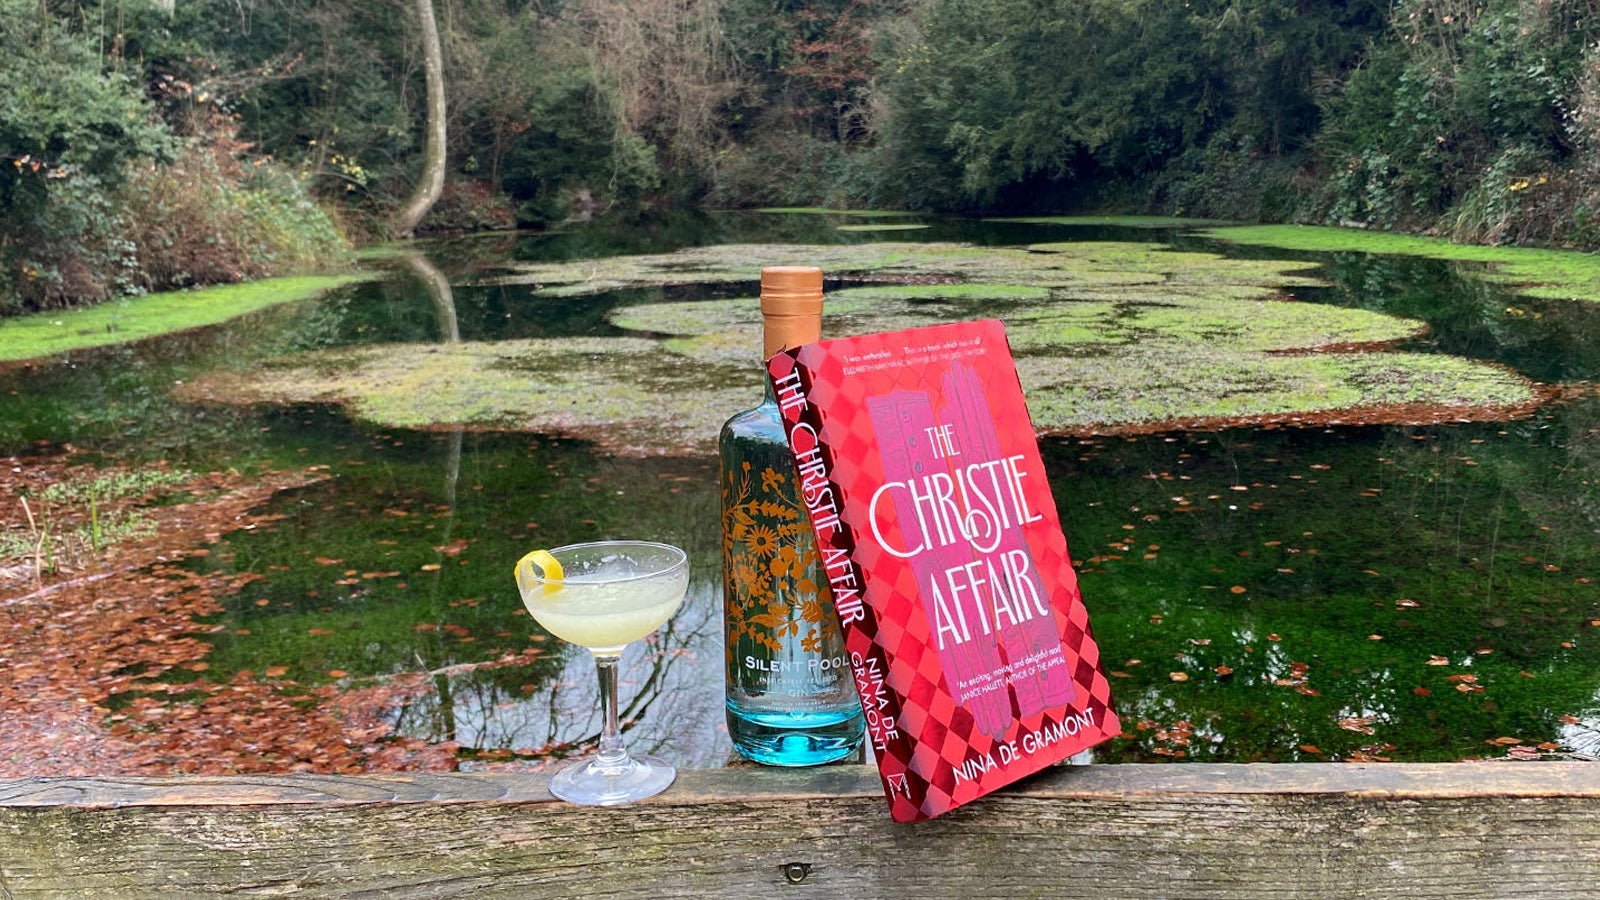 A cocktail, a bottle of Silent Pool Gin, and a copy of The Christie Affair